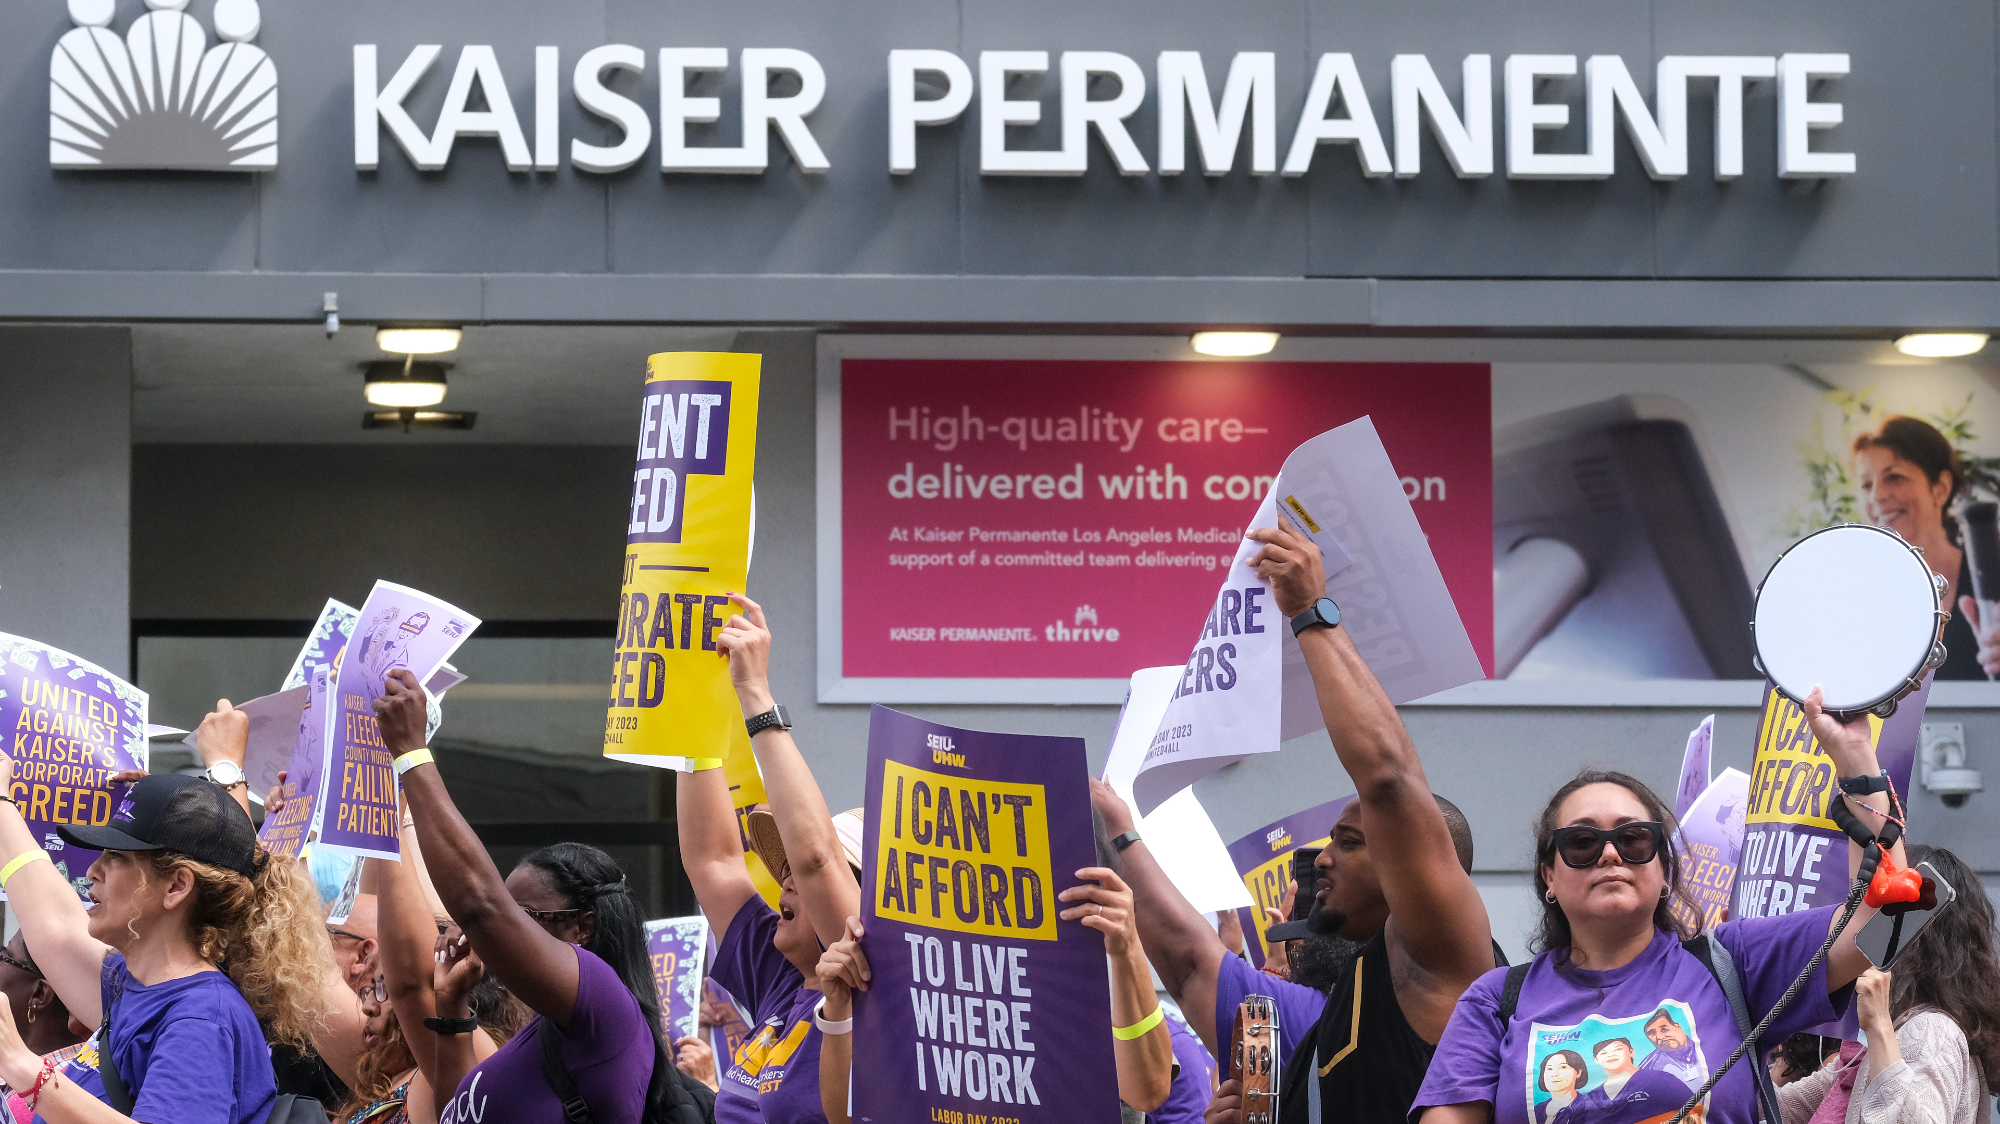 Kaiser Permanente Overall health Care Workers Set to Strike This Week – Mother Jones Reports